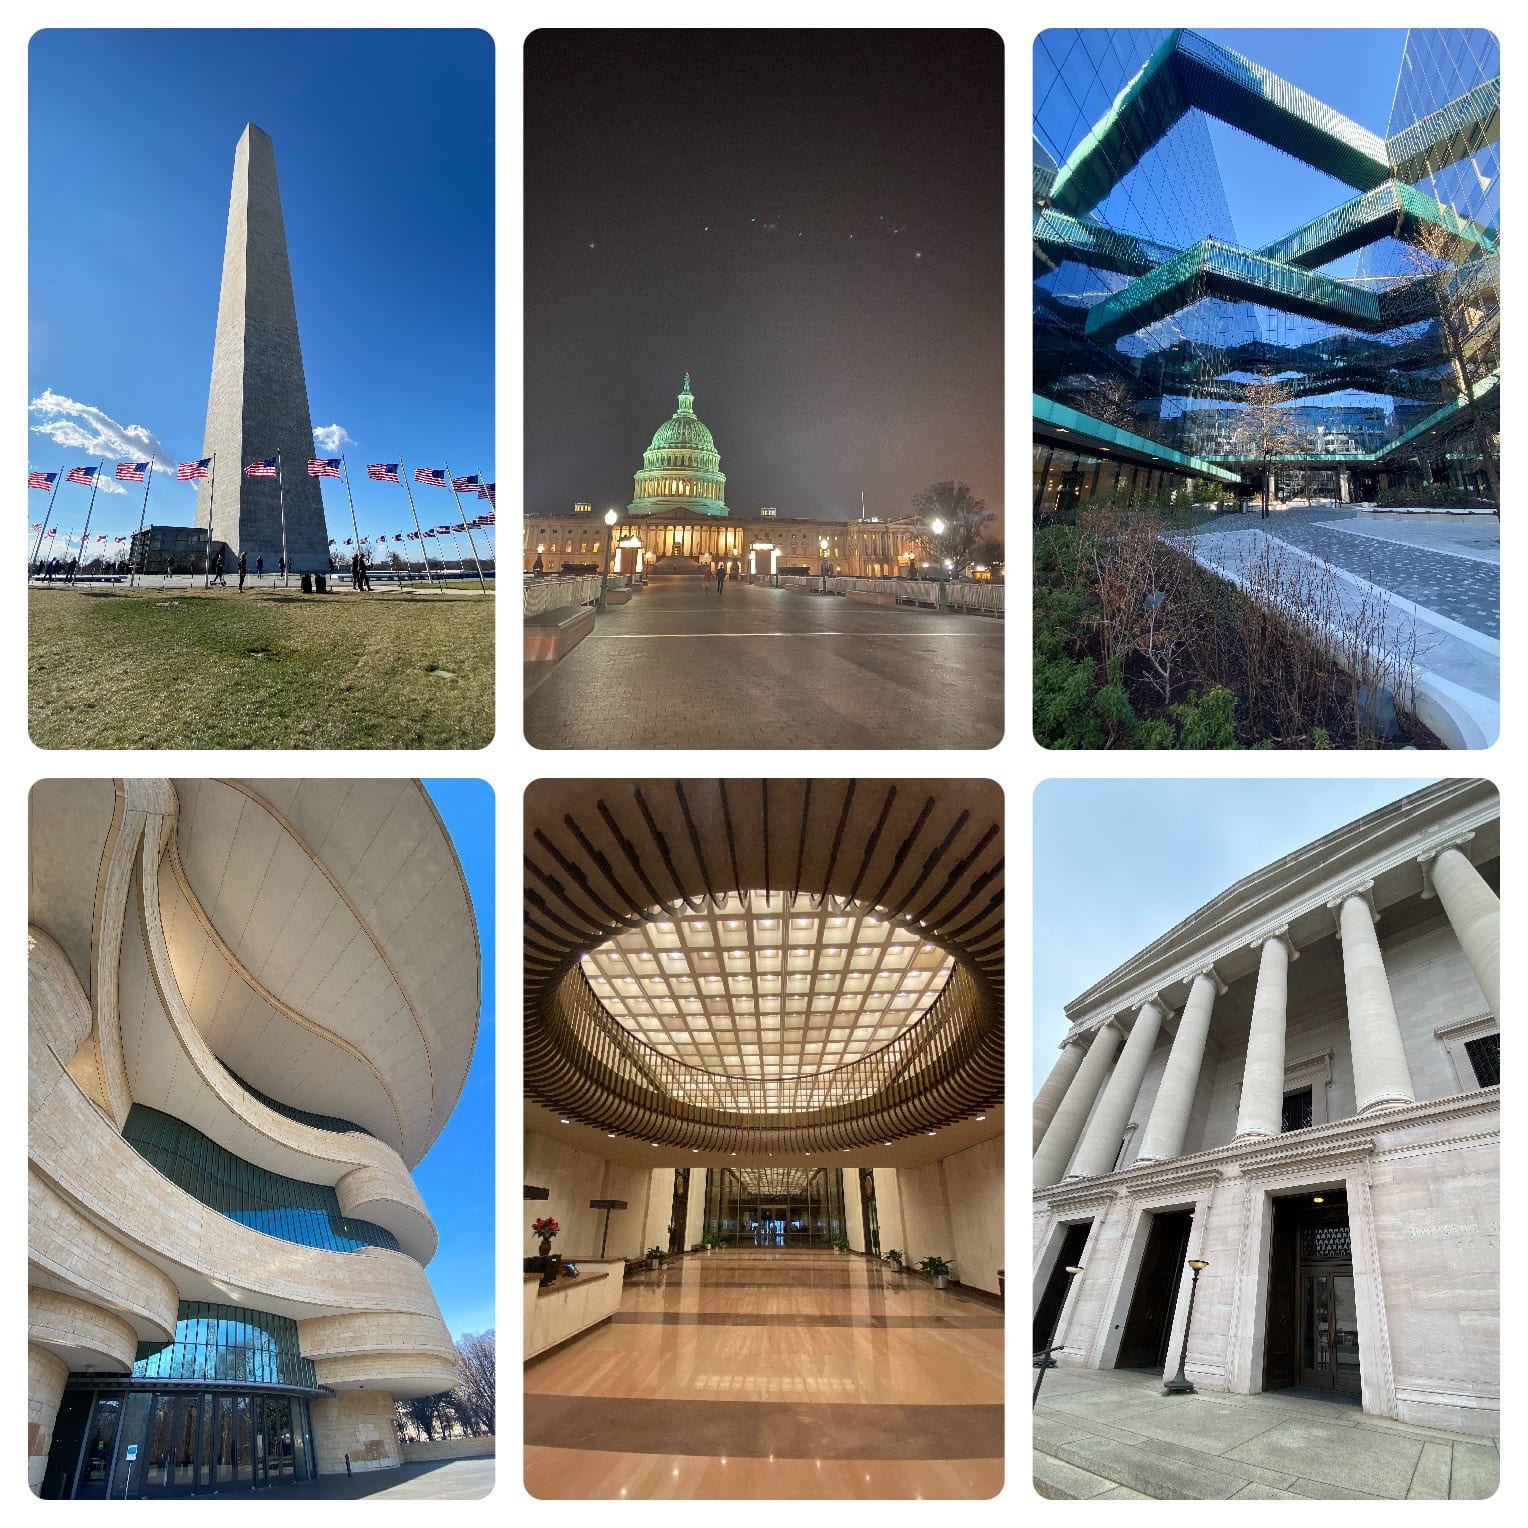 Collage of 6 images. Clockwise from upper left corner: the Washington Monument surrounded by a circle of American flags, the United States Capitol lit up at night in front of a long street, several class walkways in between two glass buildings, several large entrances underneath seven pillars, an intricate circular ceiling design with a long hallway underneath, and the front of an abstract building with circular edges